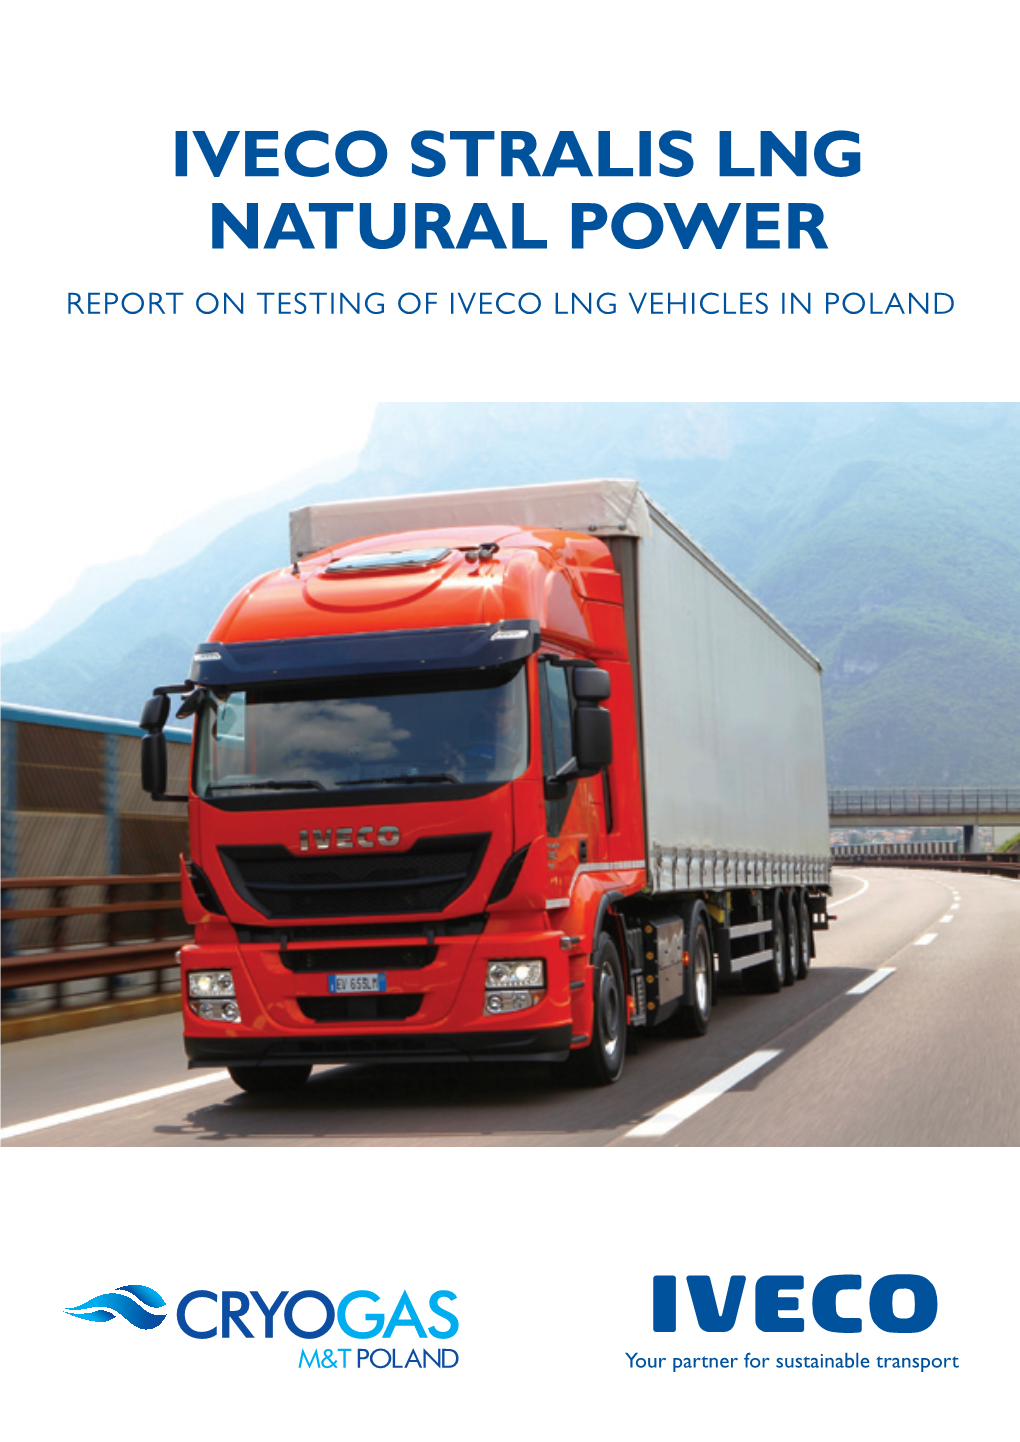 Iveco Stralis Lng Natural Power Report on Testing of Iveco Lng Vehicles in Poland